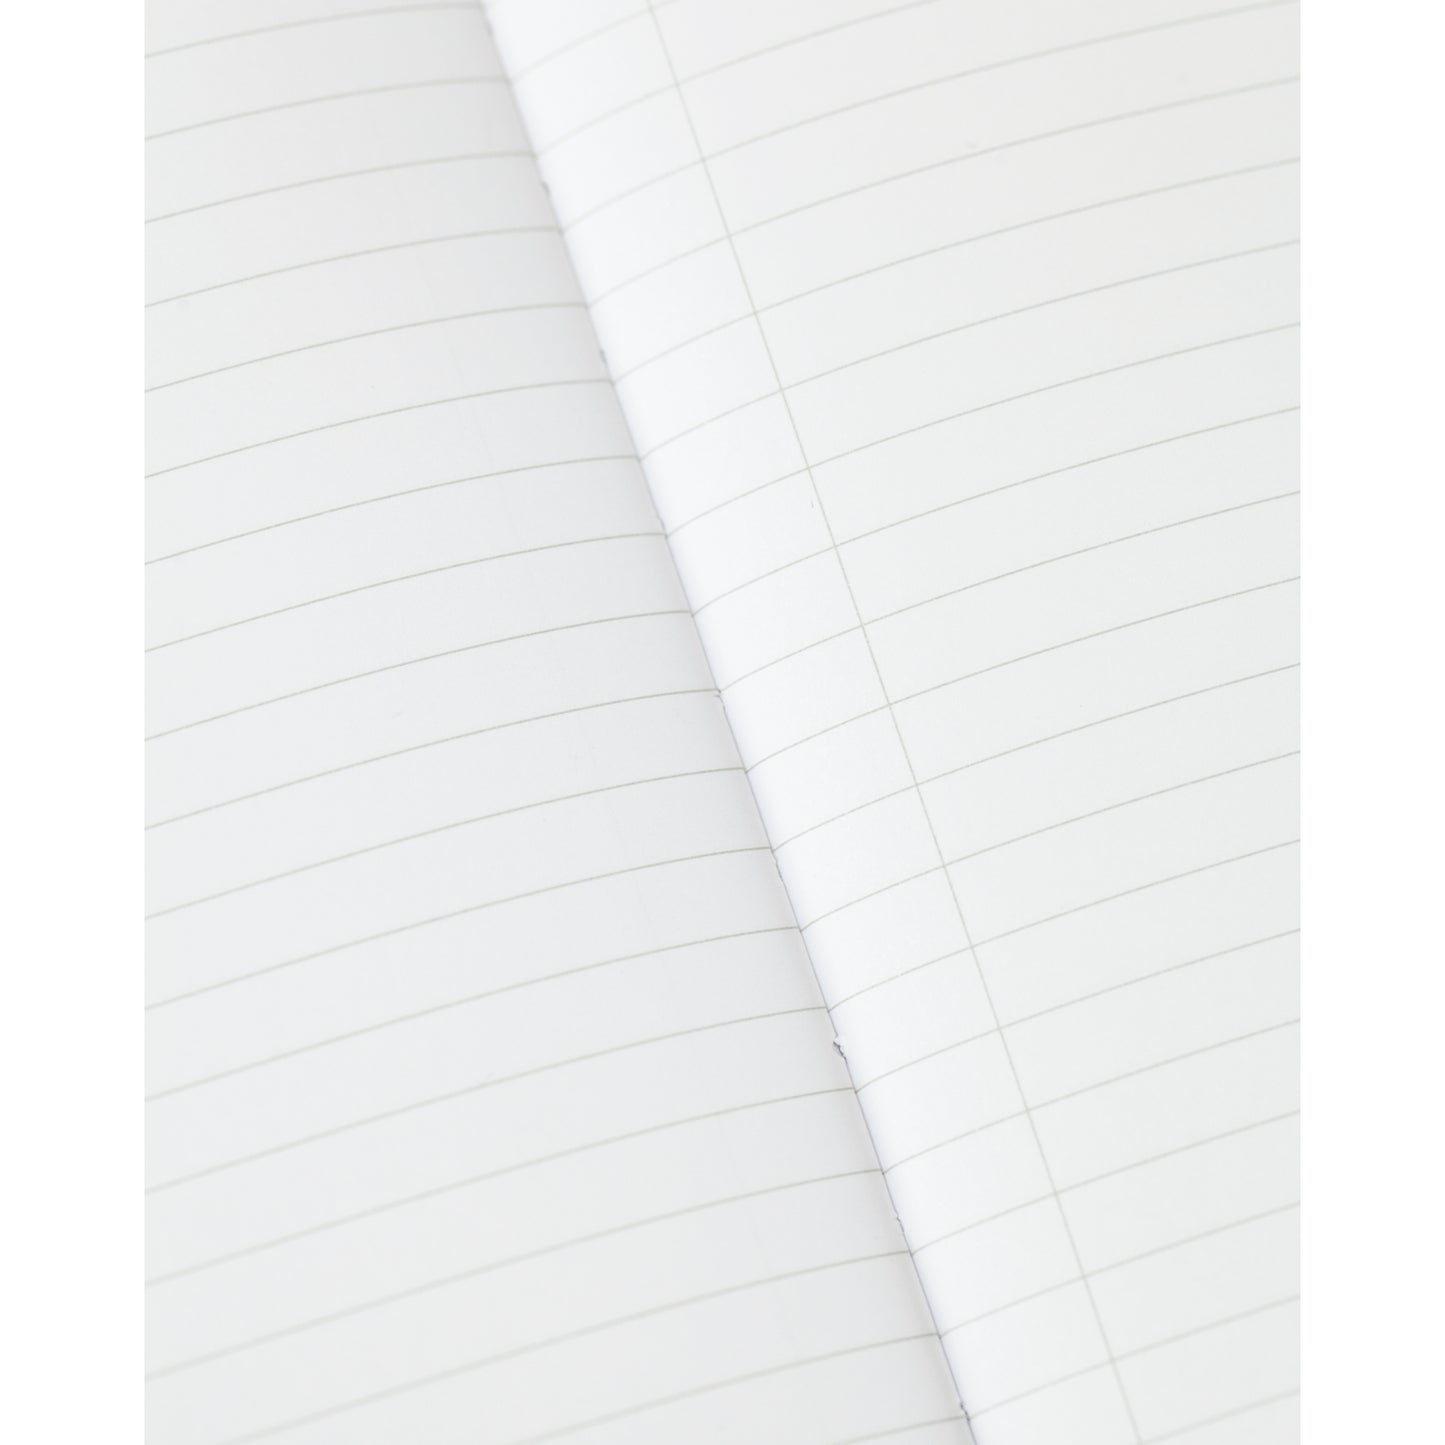 Bees Softcover Notebook Lined